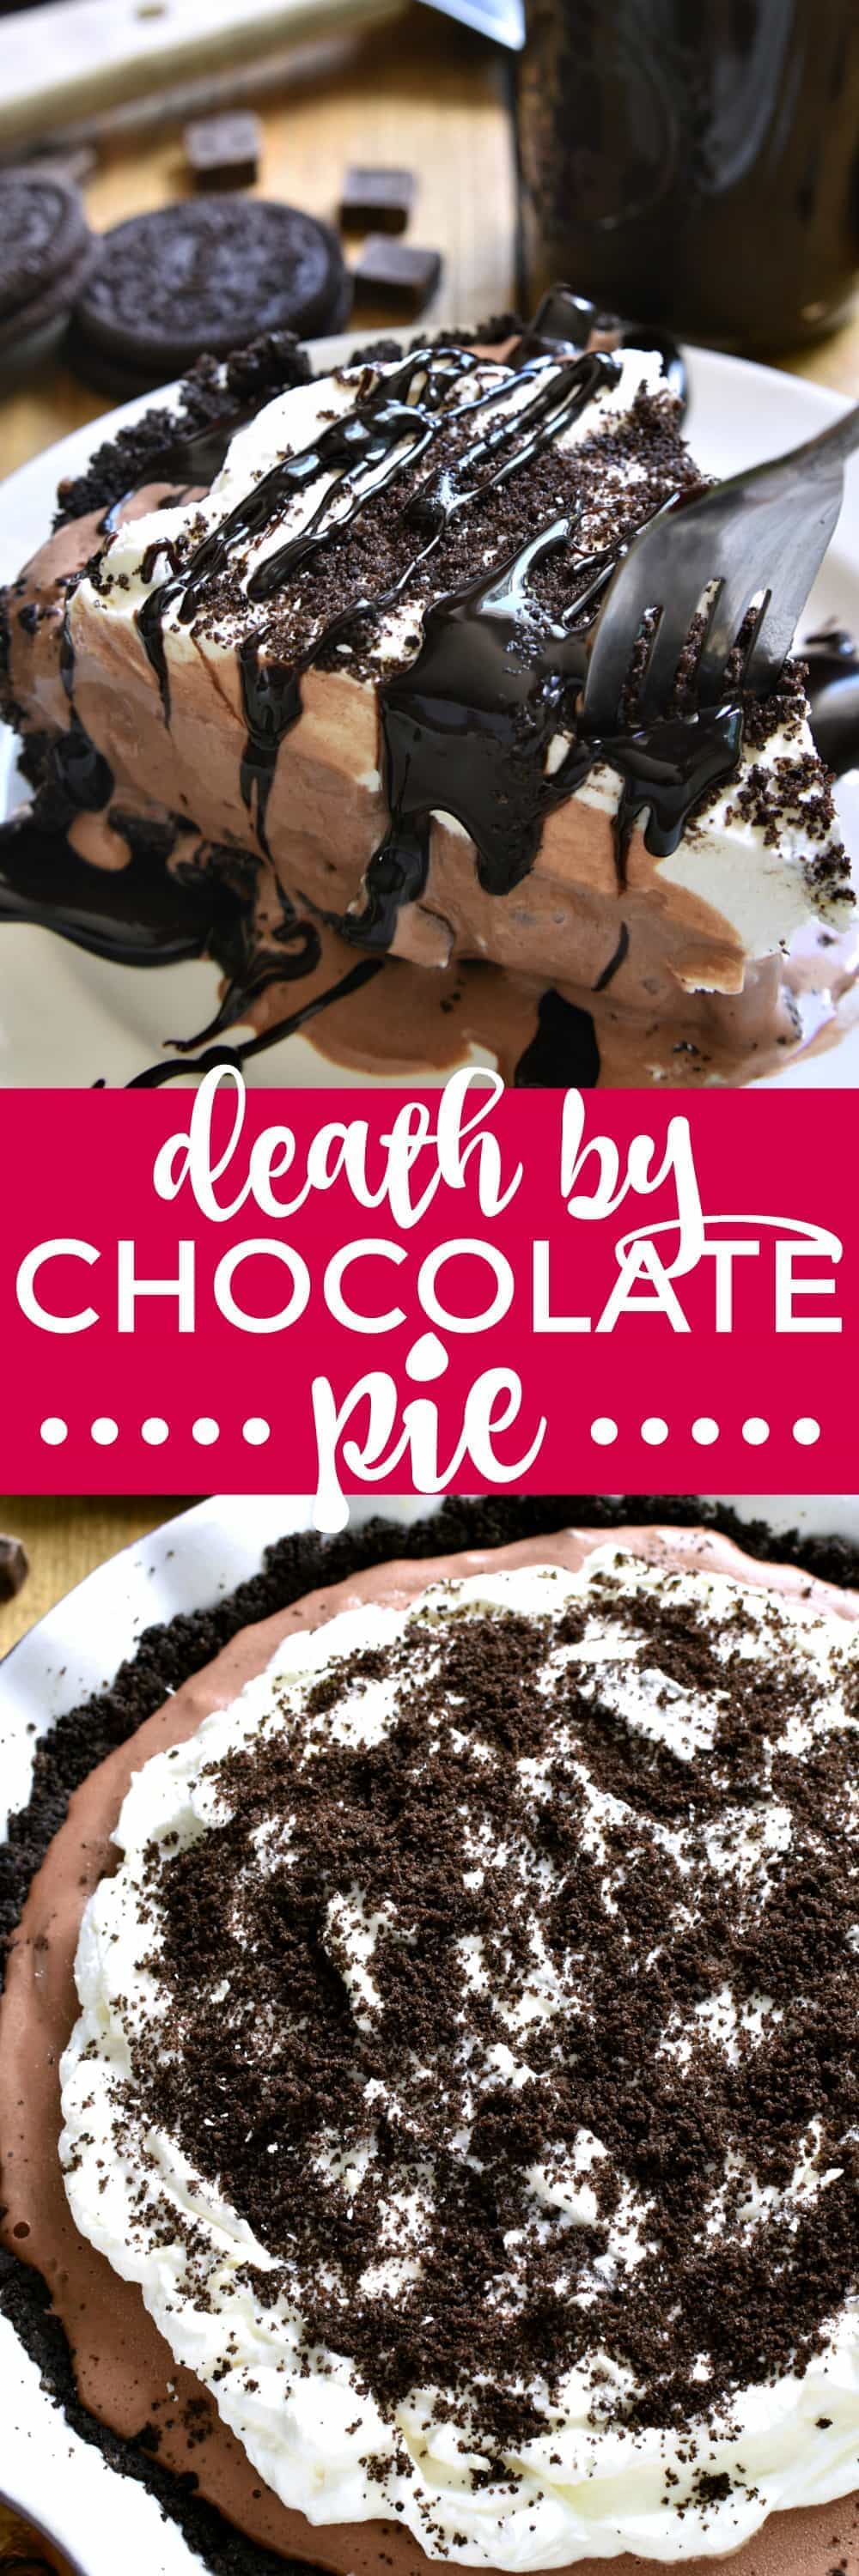 This Frozen Death by Chocolate Pie is the ULTIMATE chocolate lover's treat! Loaded with delicious chocolate flavor and topped with homemade whipped cream and hot fudge, this pie is perfect for birthdays, ladies nights, or special occasions. And best of all, it's completely no-bake!